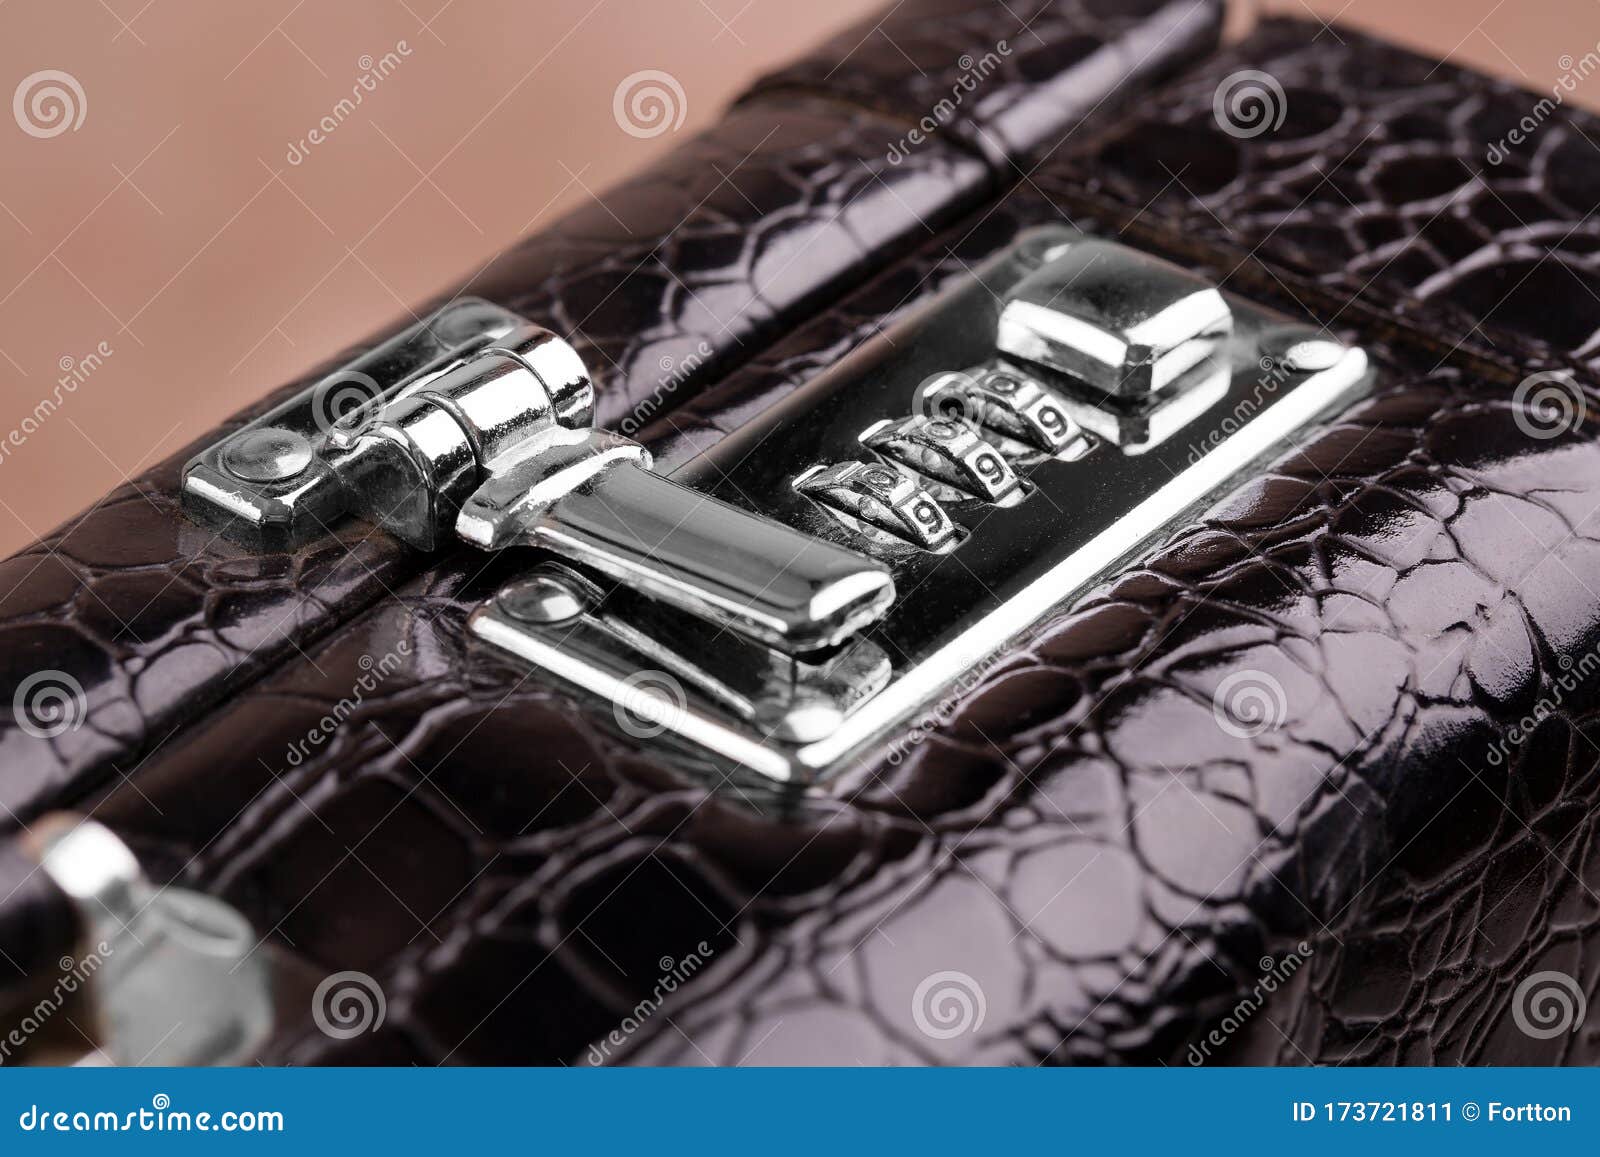 Close-up of a Metal Combination Lock on a Suitcase Stock Image - Image ...